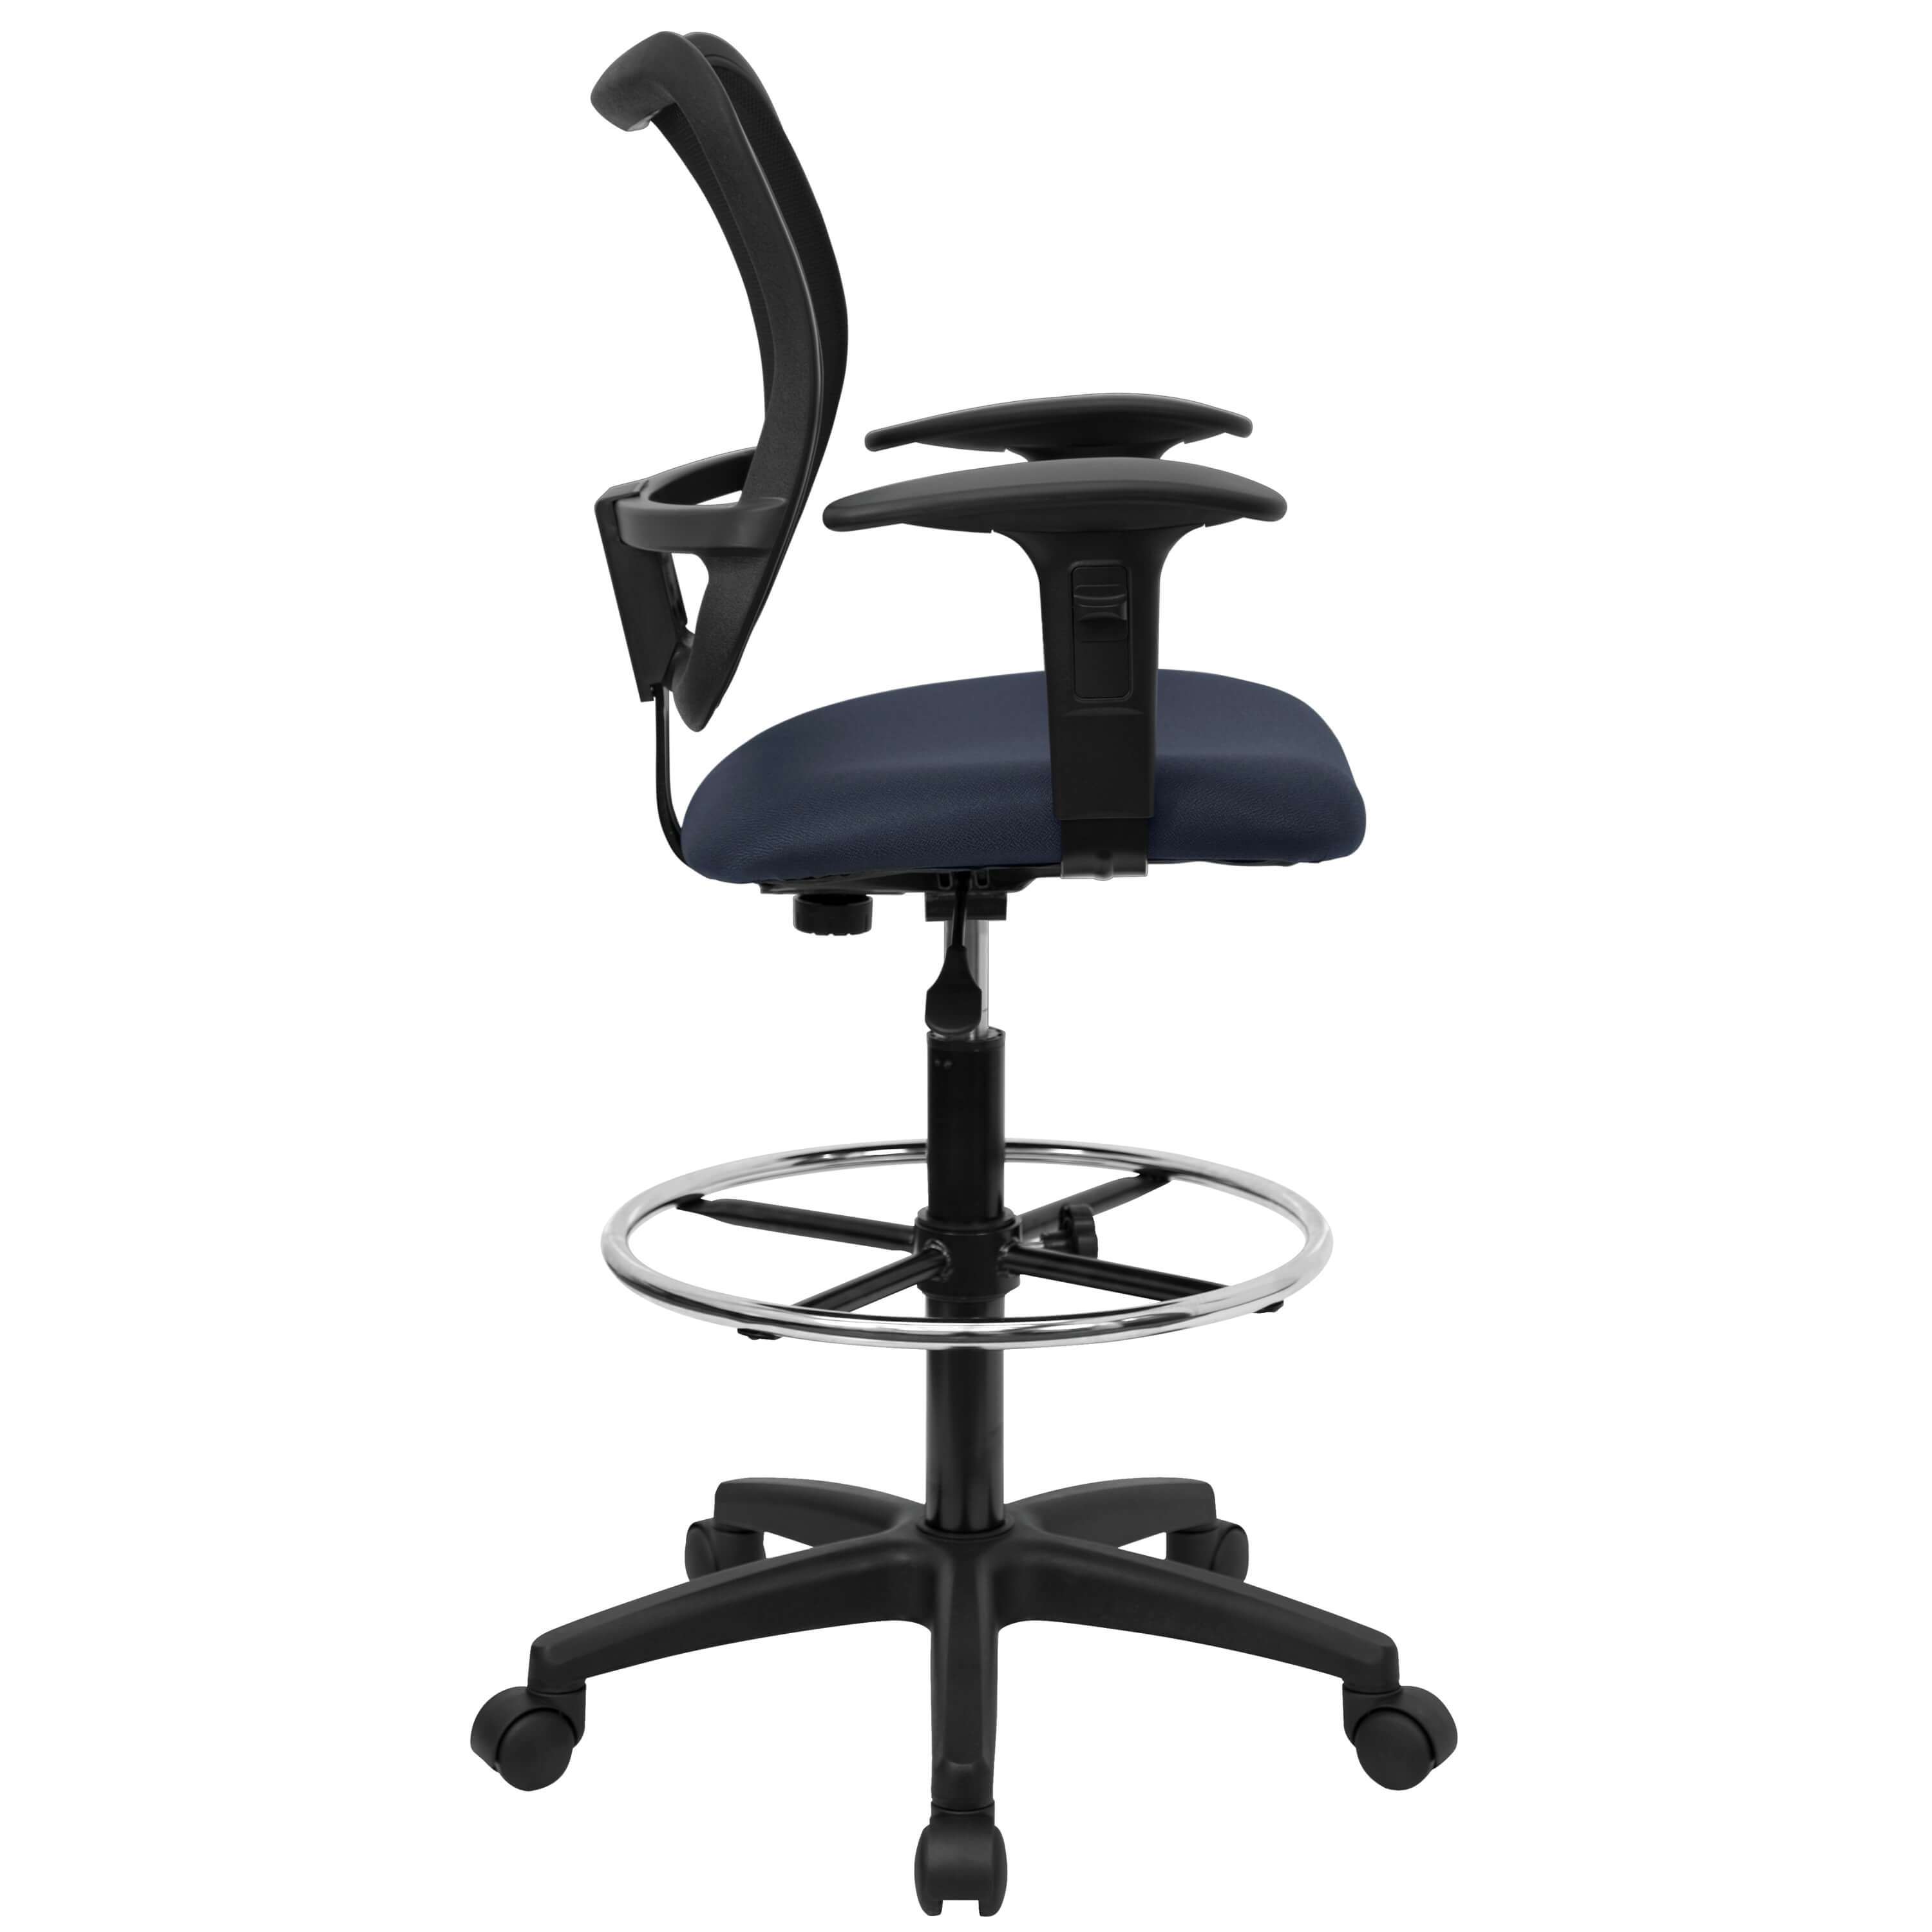 Drafting office chair side view